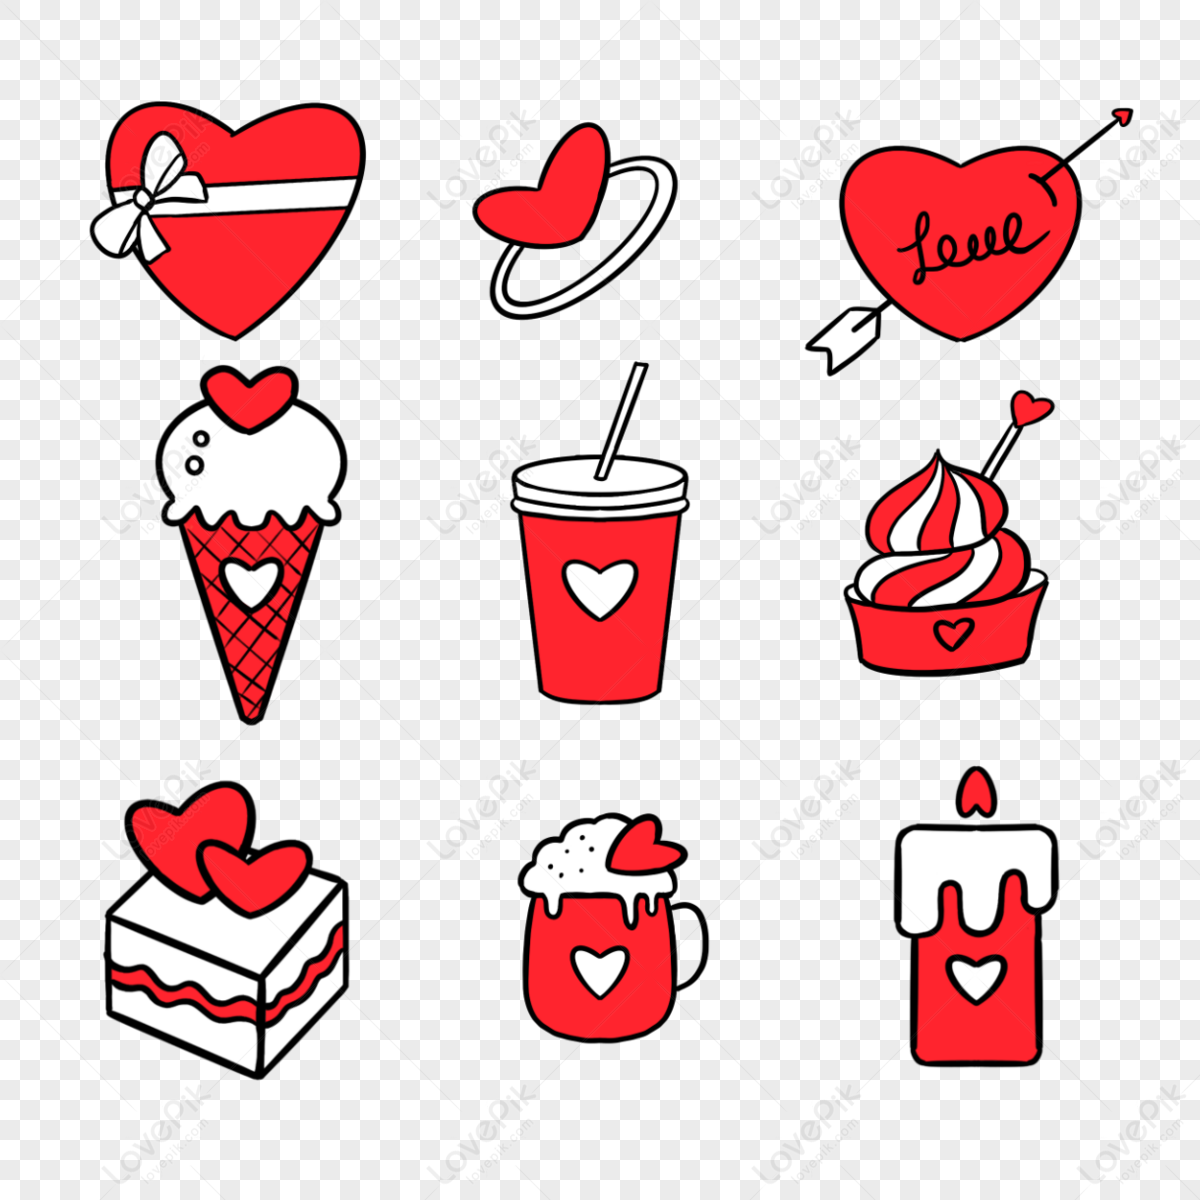 Full of love images hd pictures for free vectors download